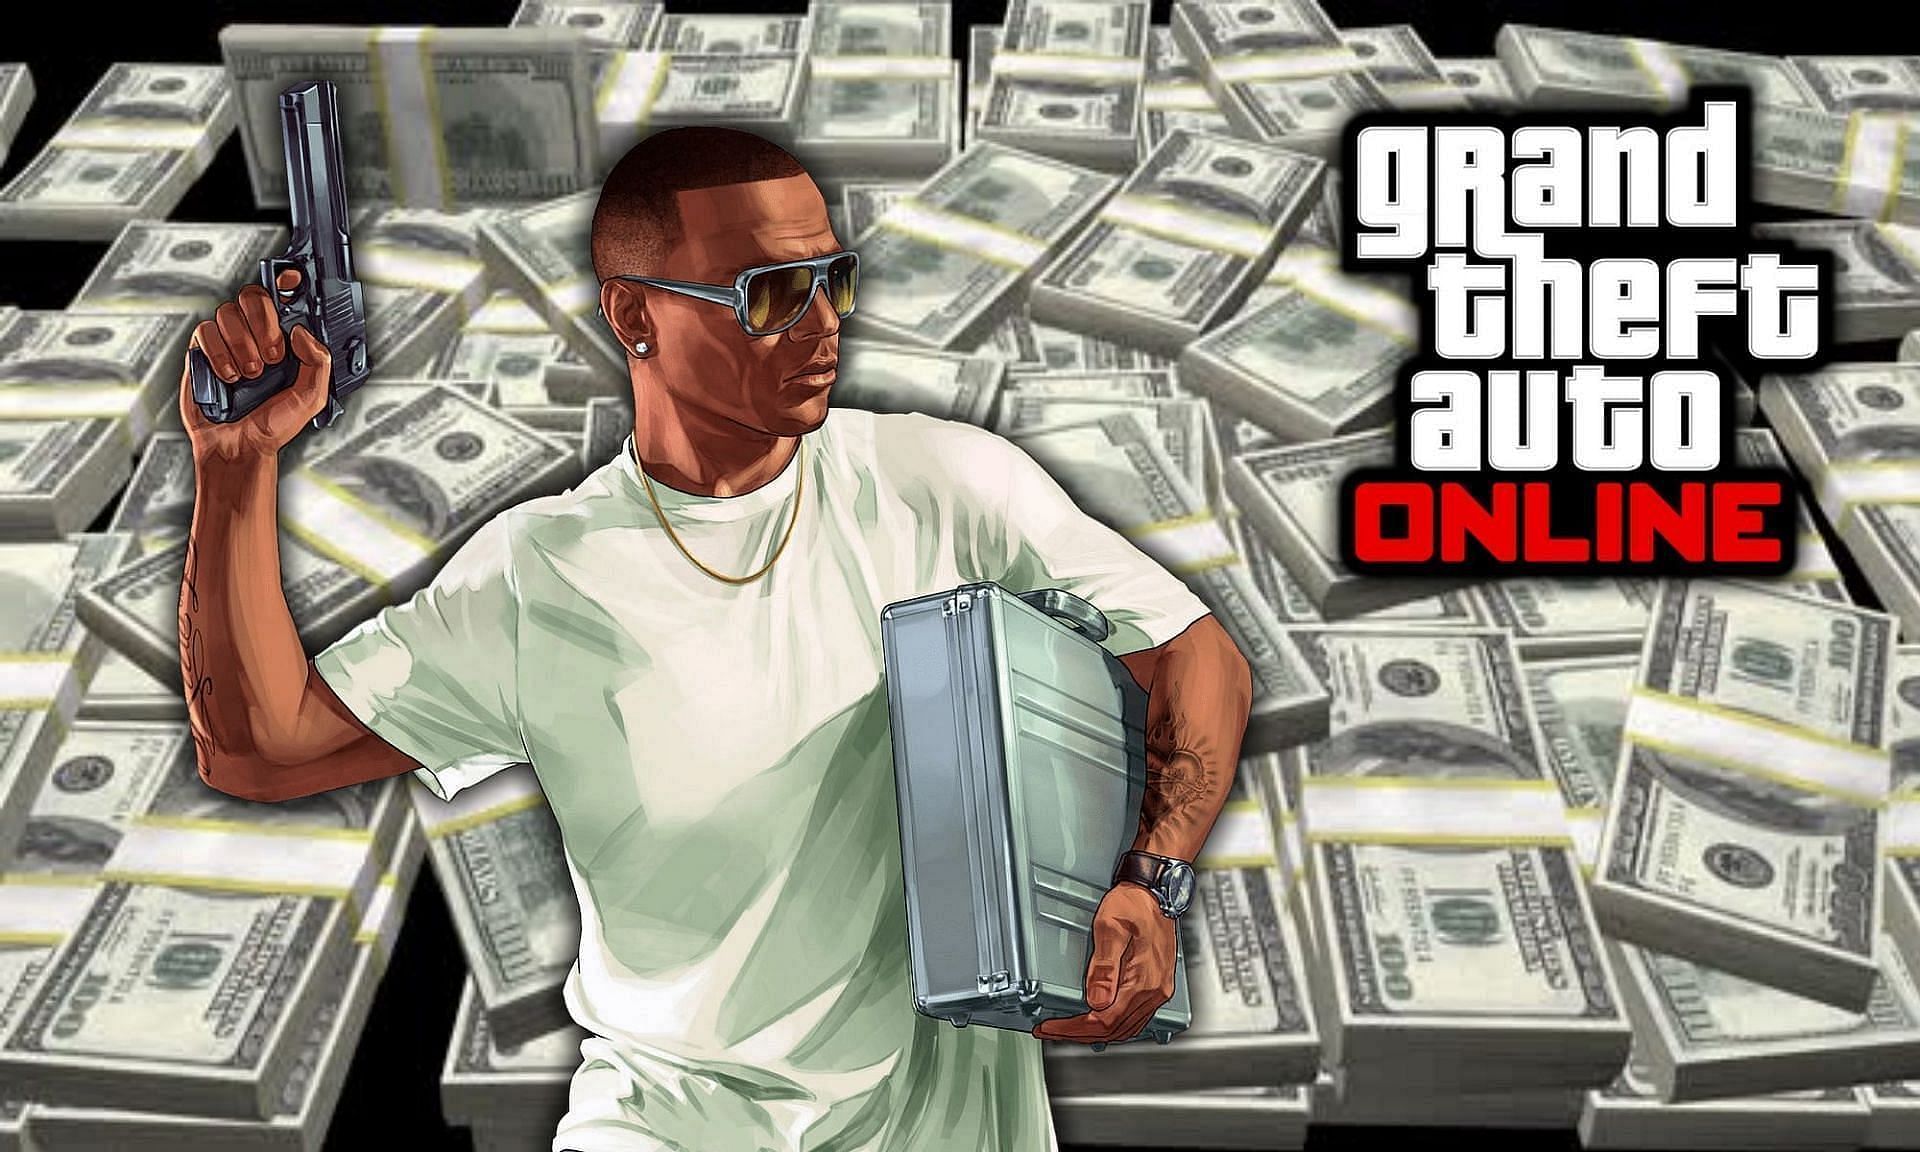 GTA Online players can use glitches to make millions (Image via Sportskeeda)